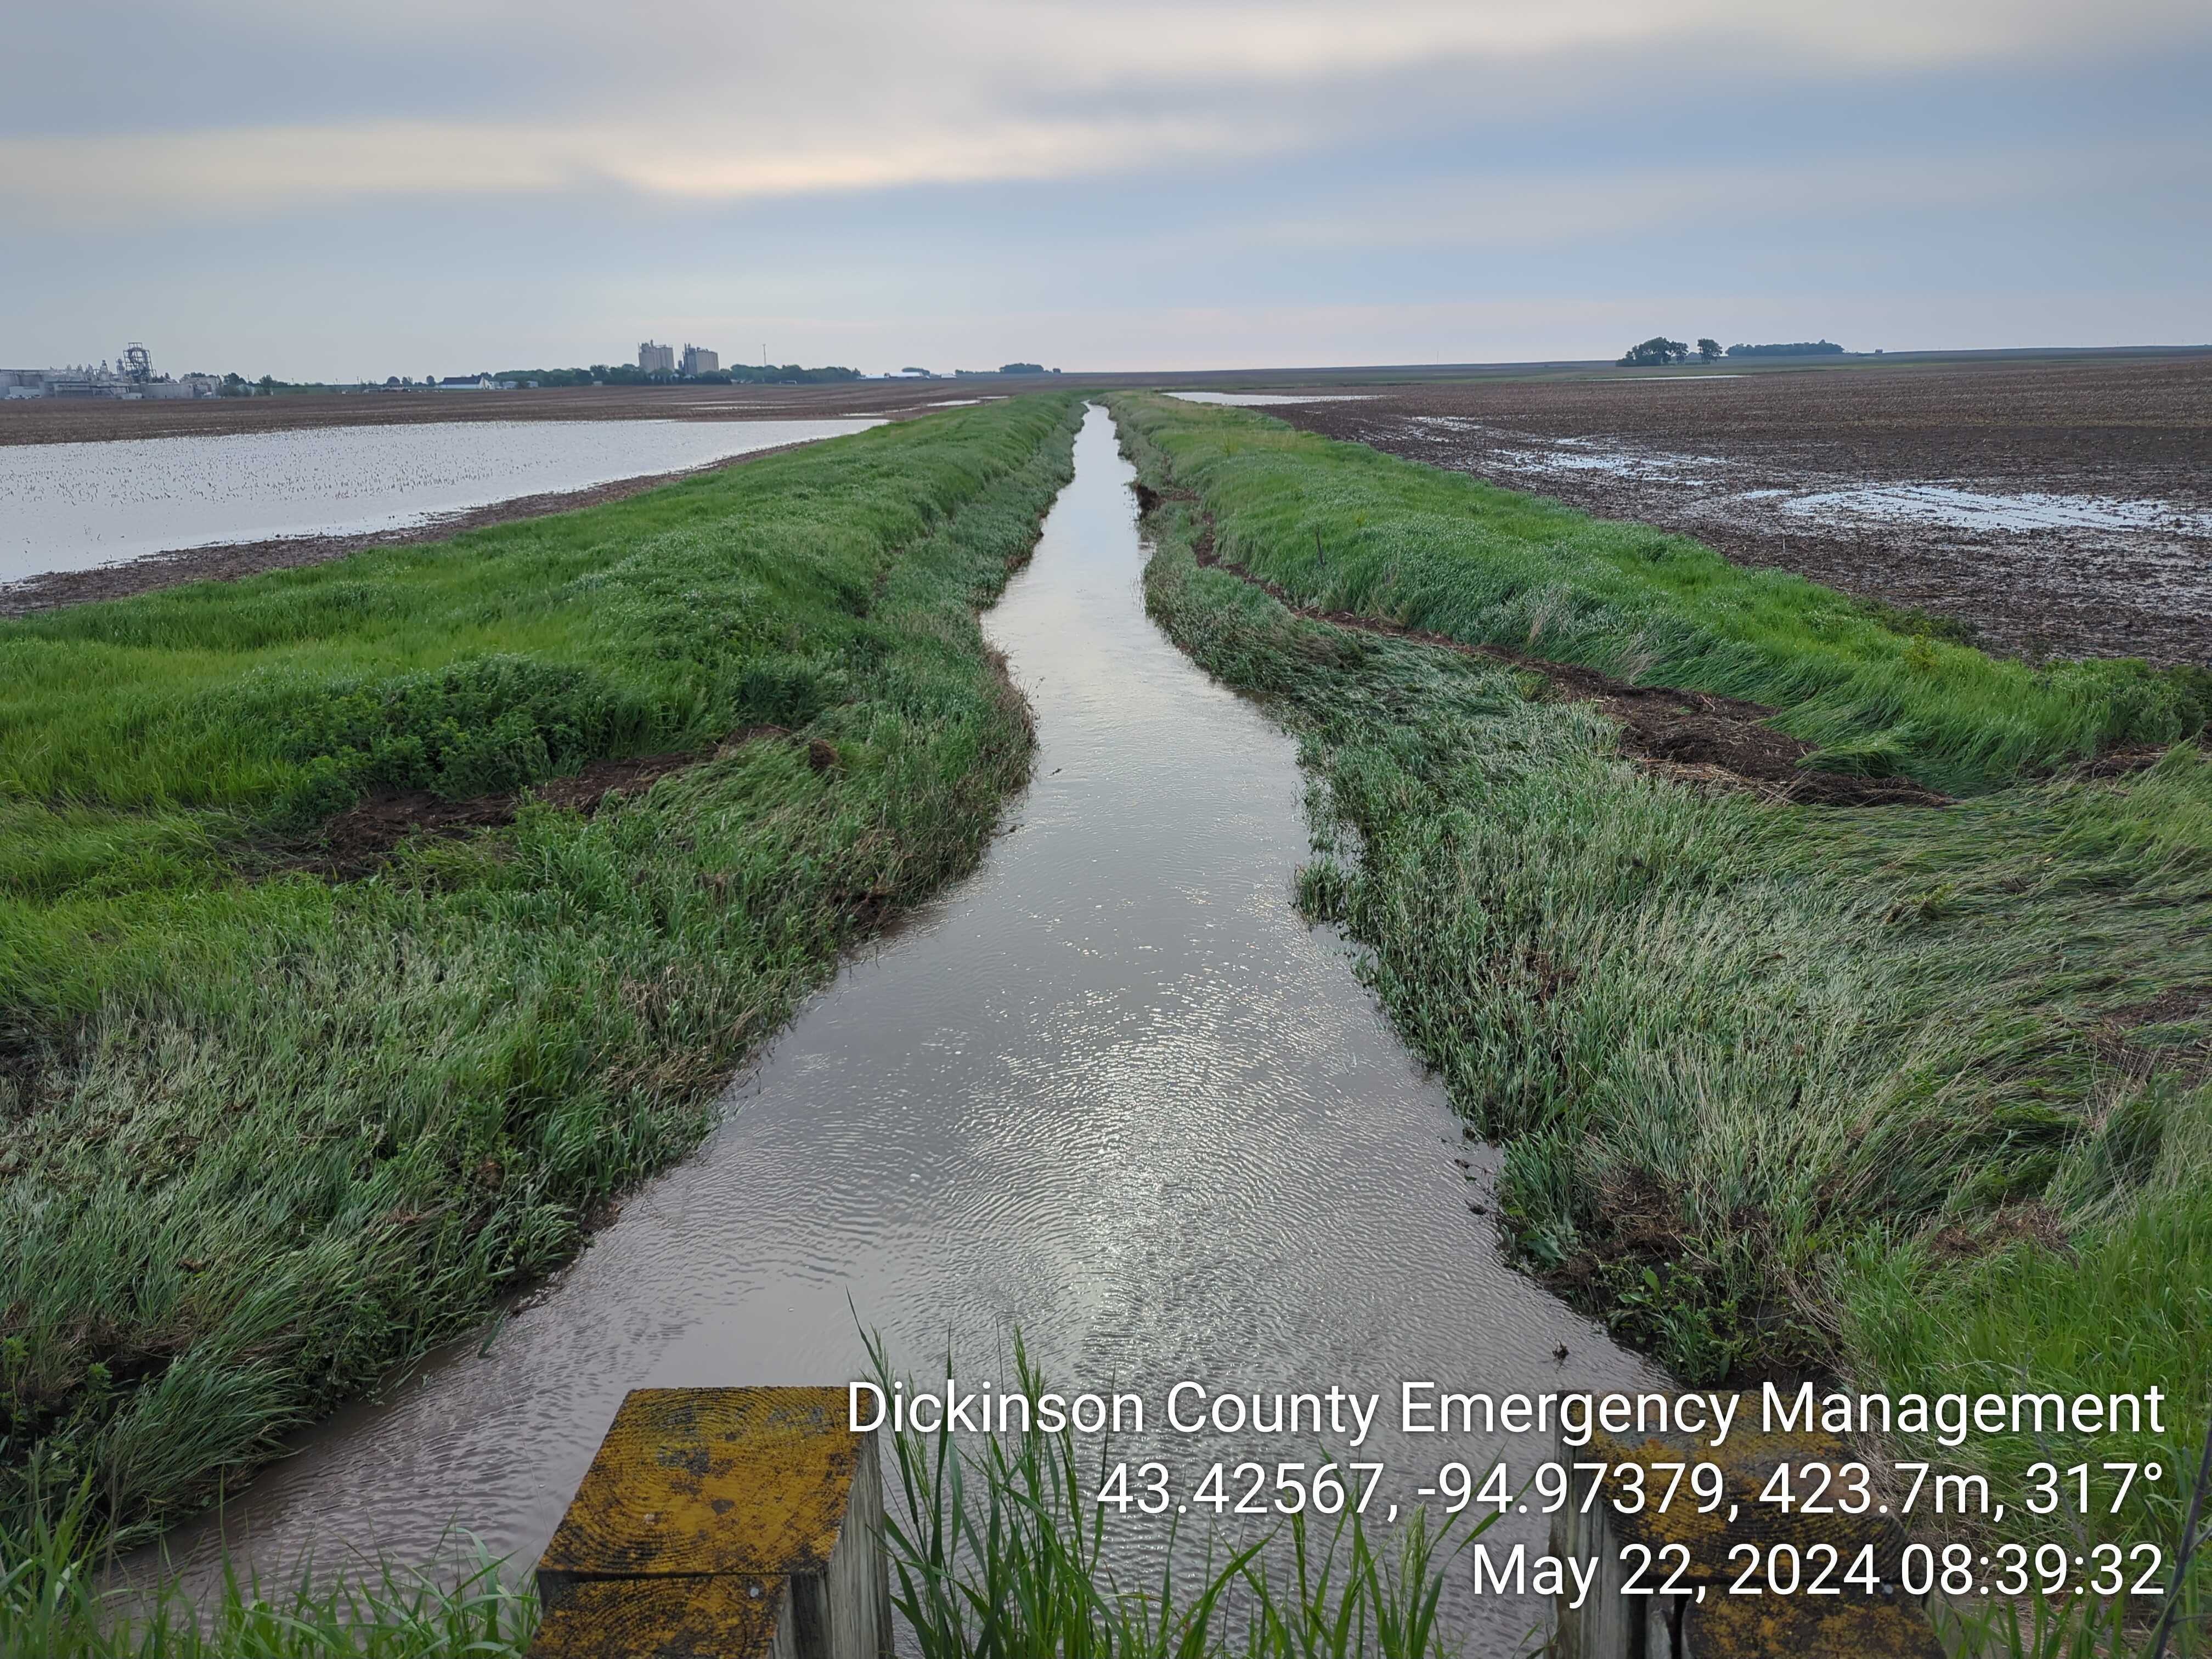 Photo of water standing in fields as well as a full ditch. Some of the grass is flattened where water level had been higher the previous night.